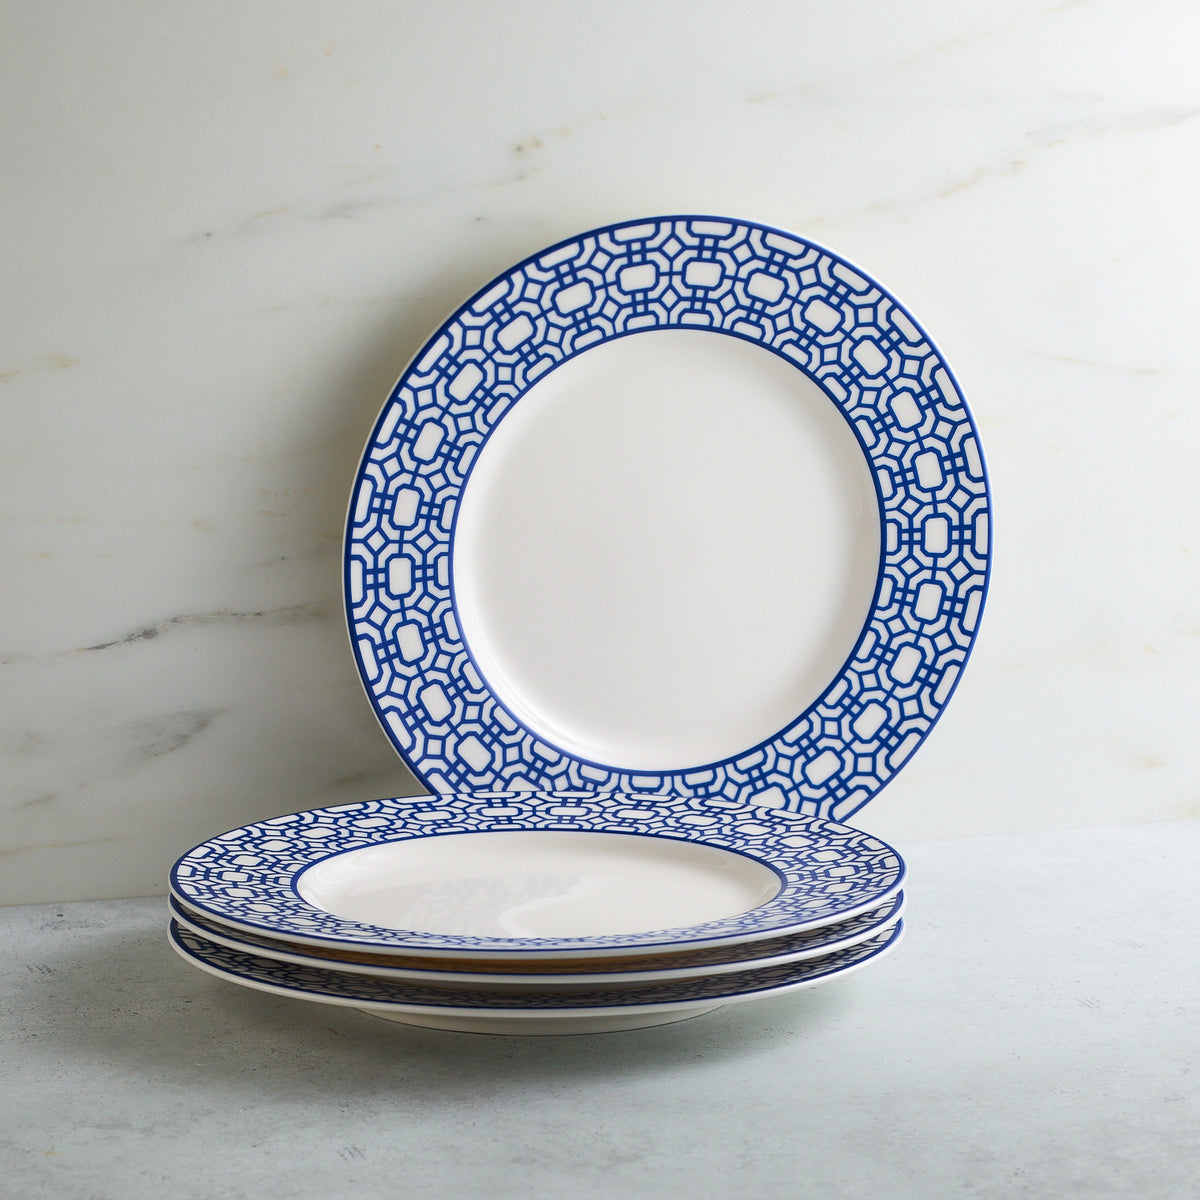 Four white plates with a blue geometric pattern along the rims, crafted from premium porcelain and beautifully stacked together on a light grey surface against a white background. Part of the timeless Newport Garden Gate Rimmed Salad Plate collection by Caskata Artisanal Home.